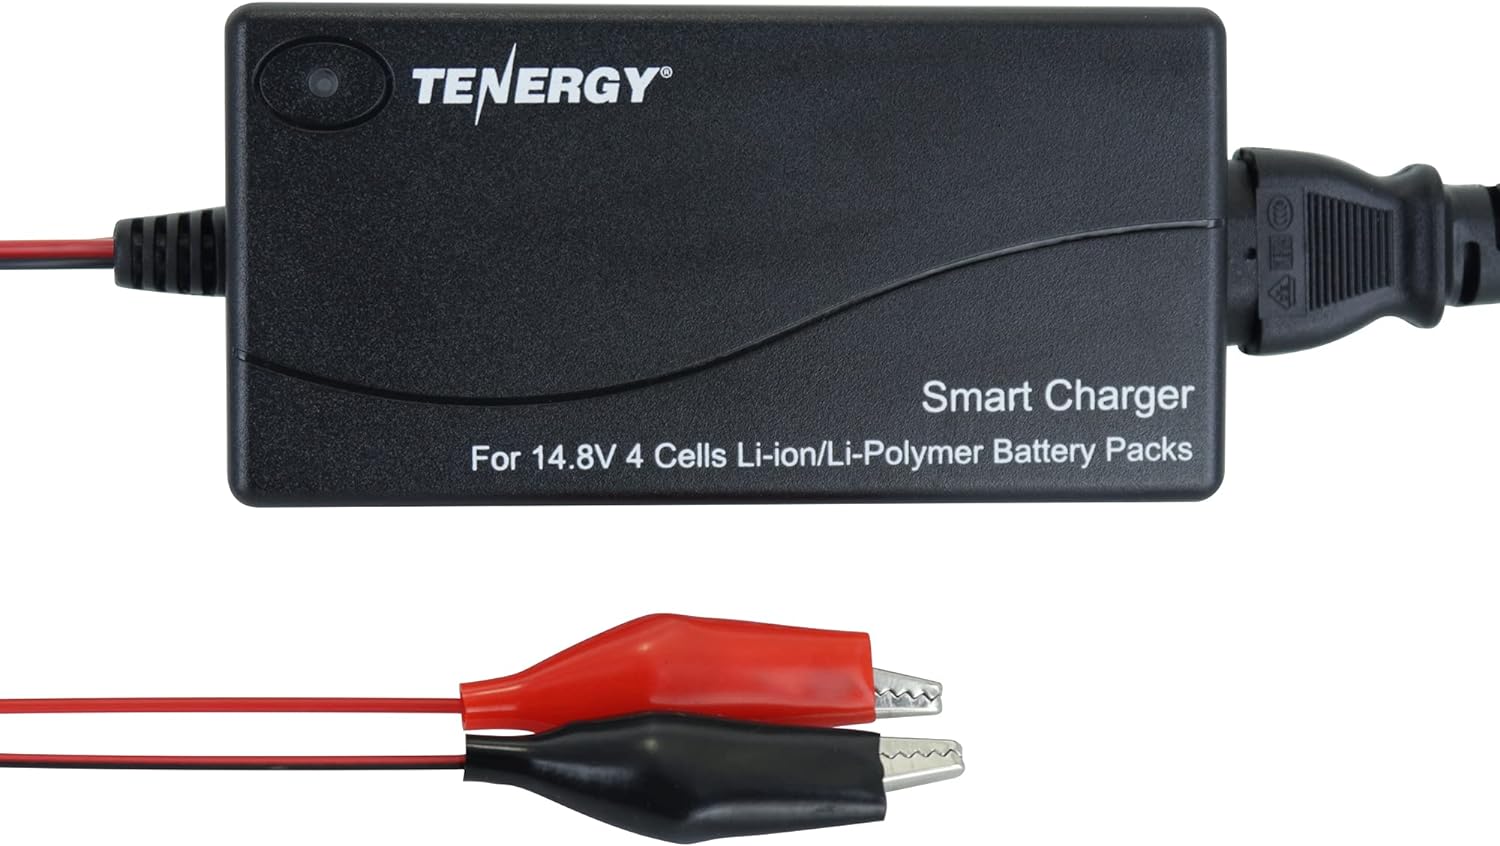 Universal Fast Smart TLP3000 1.5A Charger for Li-Ion/Li-Polymer Battery Pack (14.8V 4 Cells) - UL Approved Color Red, B